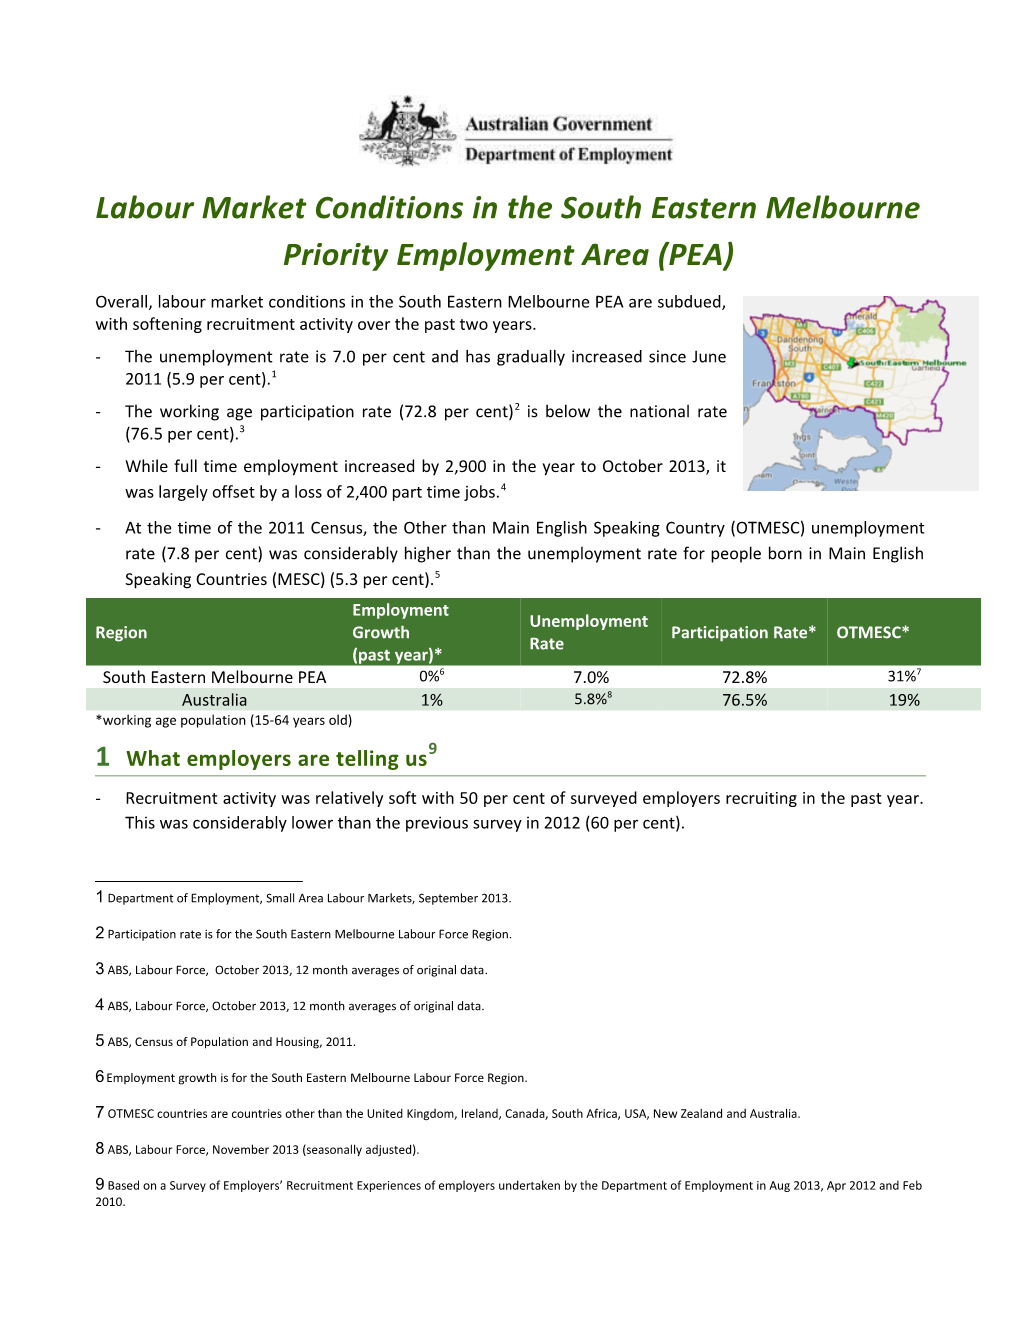 Labour Market Conditions in Thesouth Eastern Melbourne Priority Employment Area (PEA)